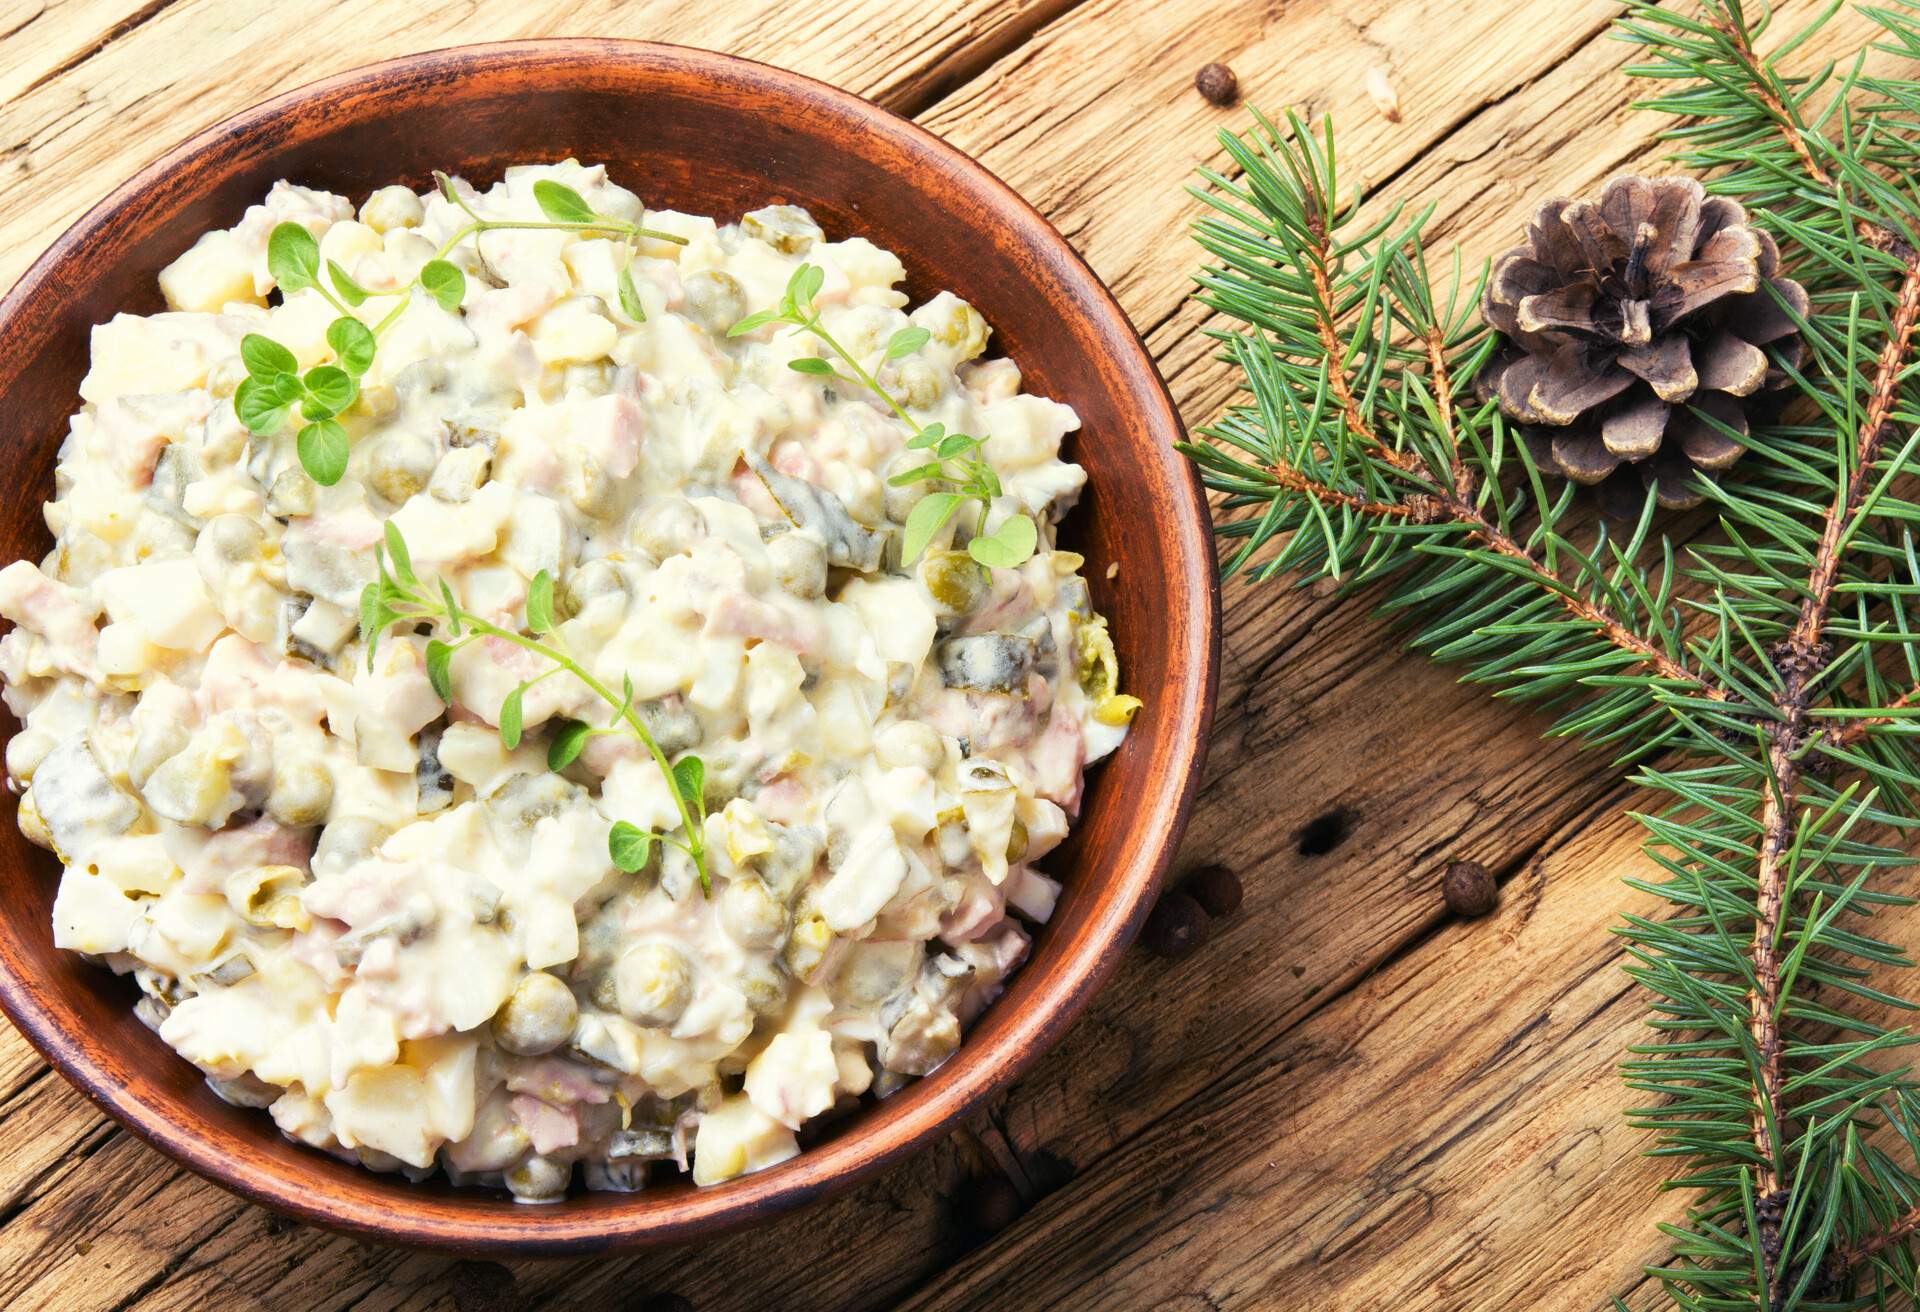 Traditional Russian meat salad Olivier, with meat and vegetables.